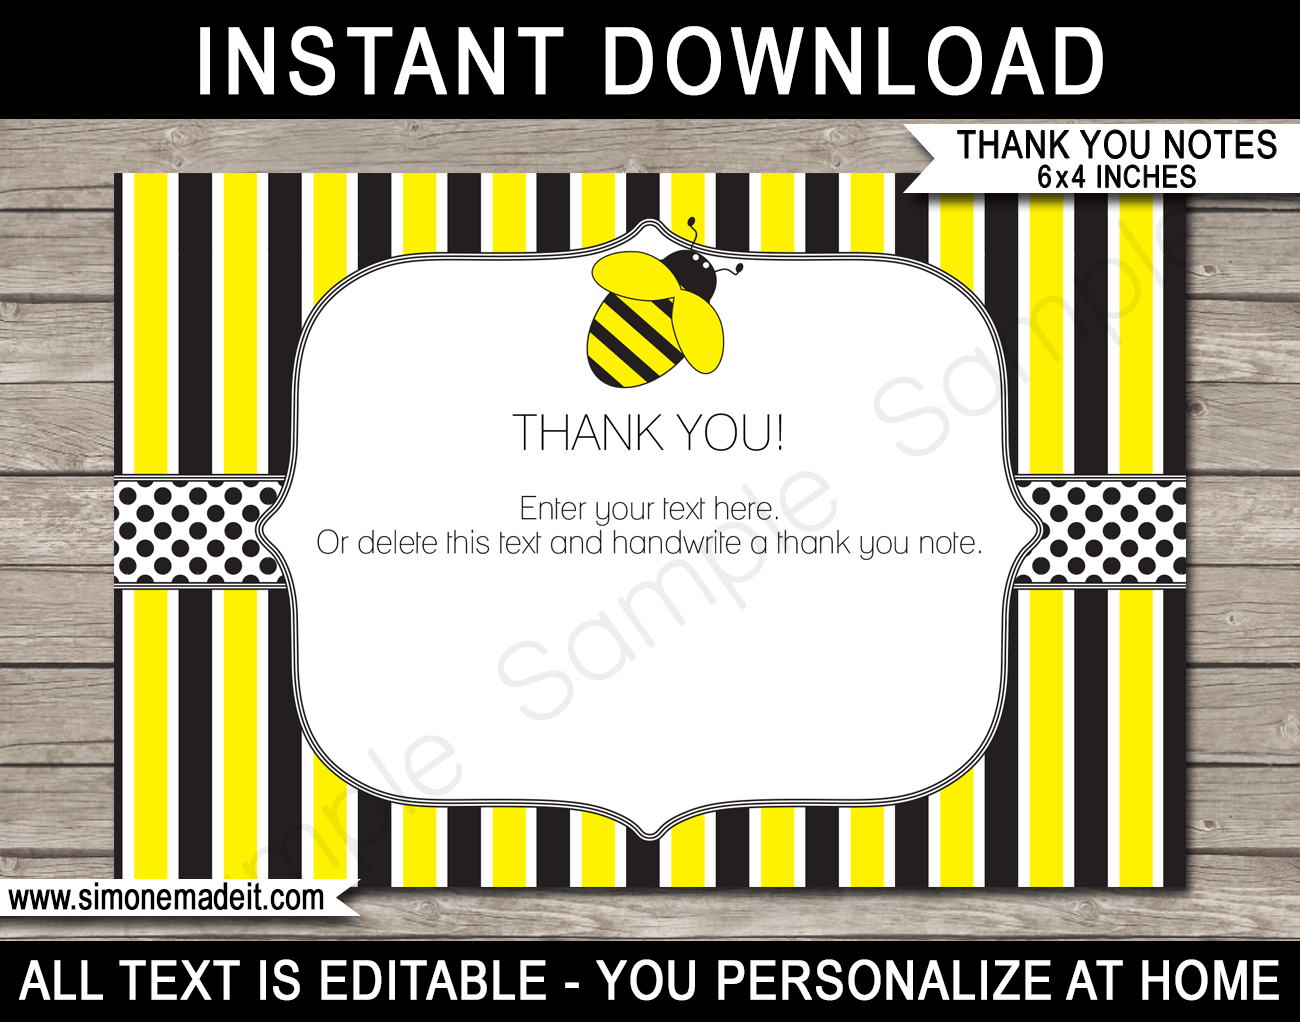 Printable Bee Party Thank You Cards - Favor Tags - Bee Birthday Party theme - Bee-day Party - Editable Template - Instant Download via simonemadeit.com